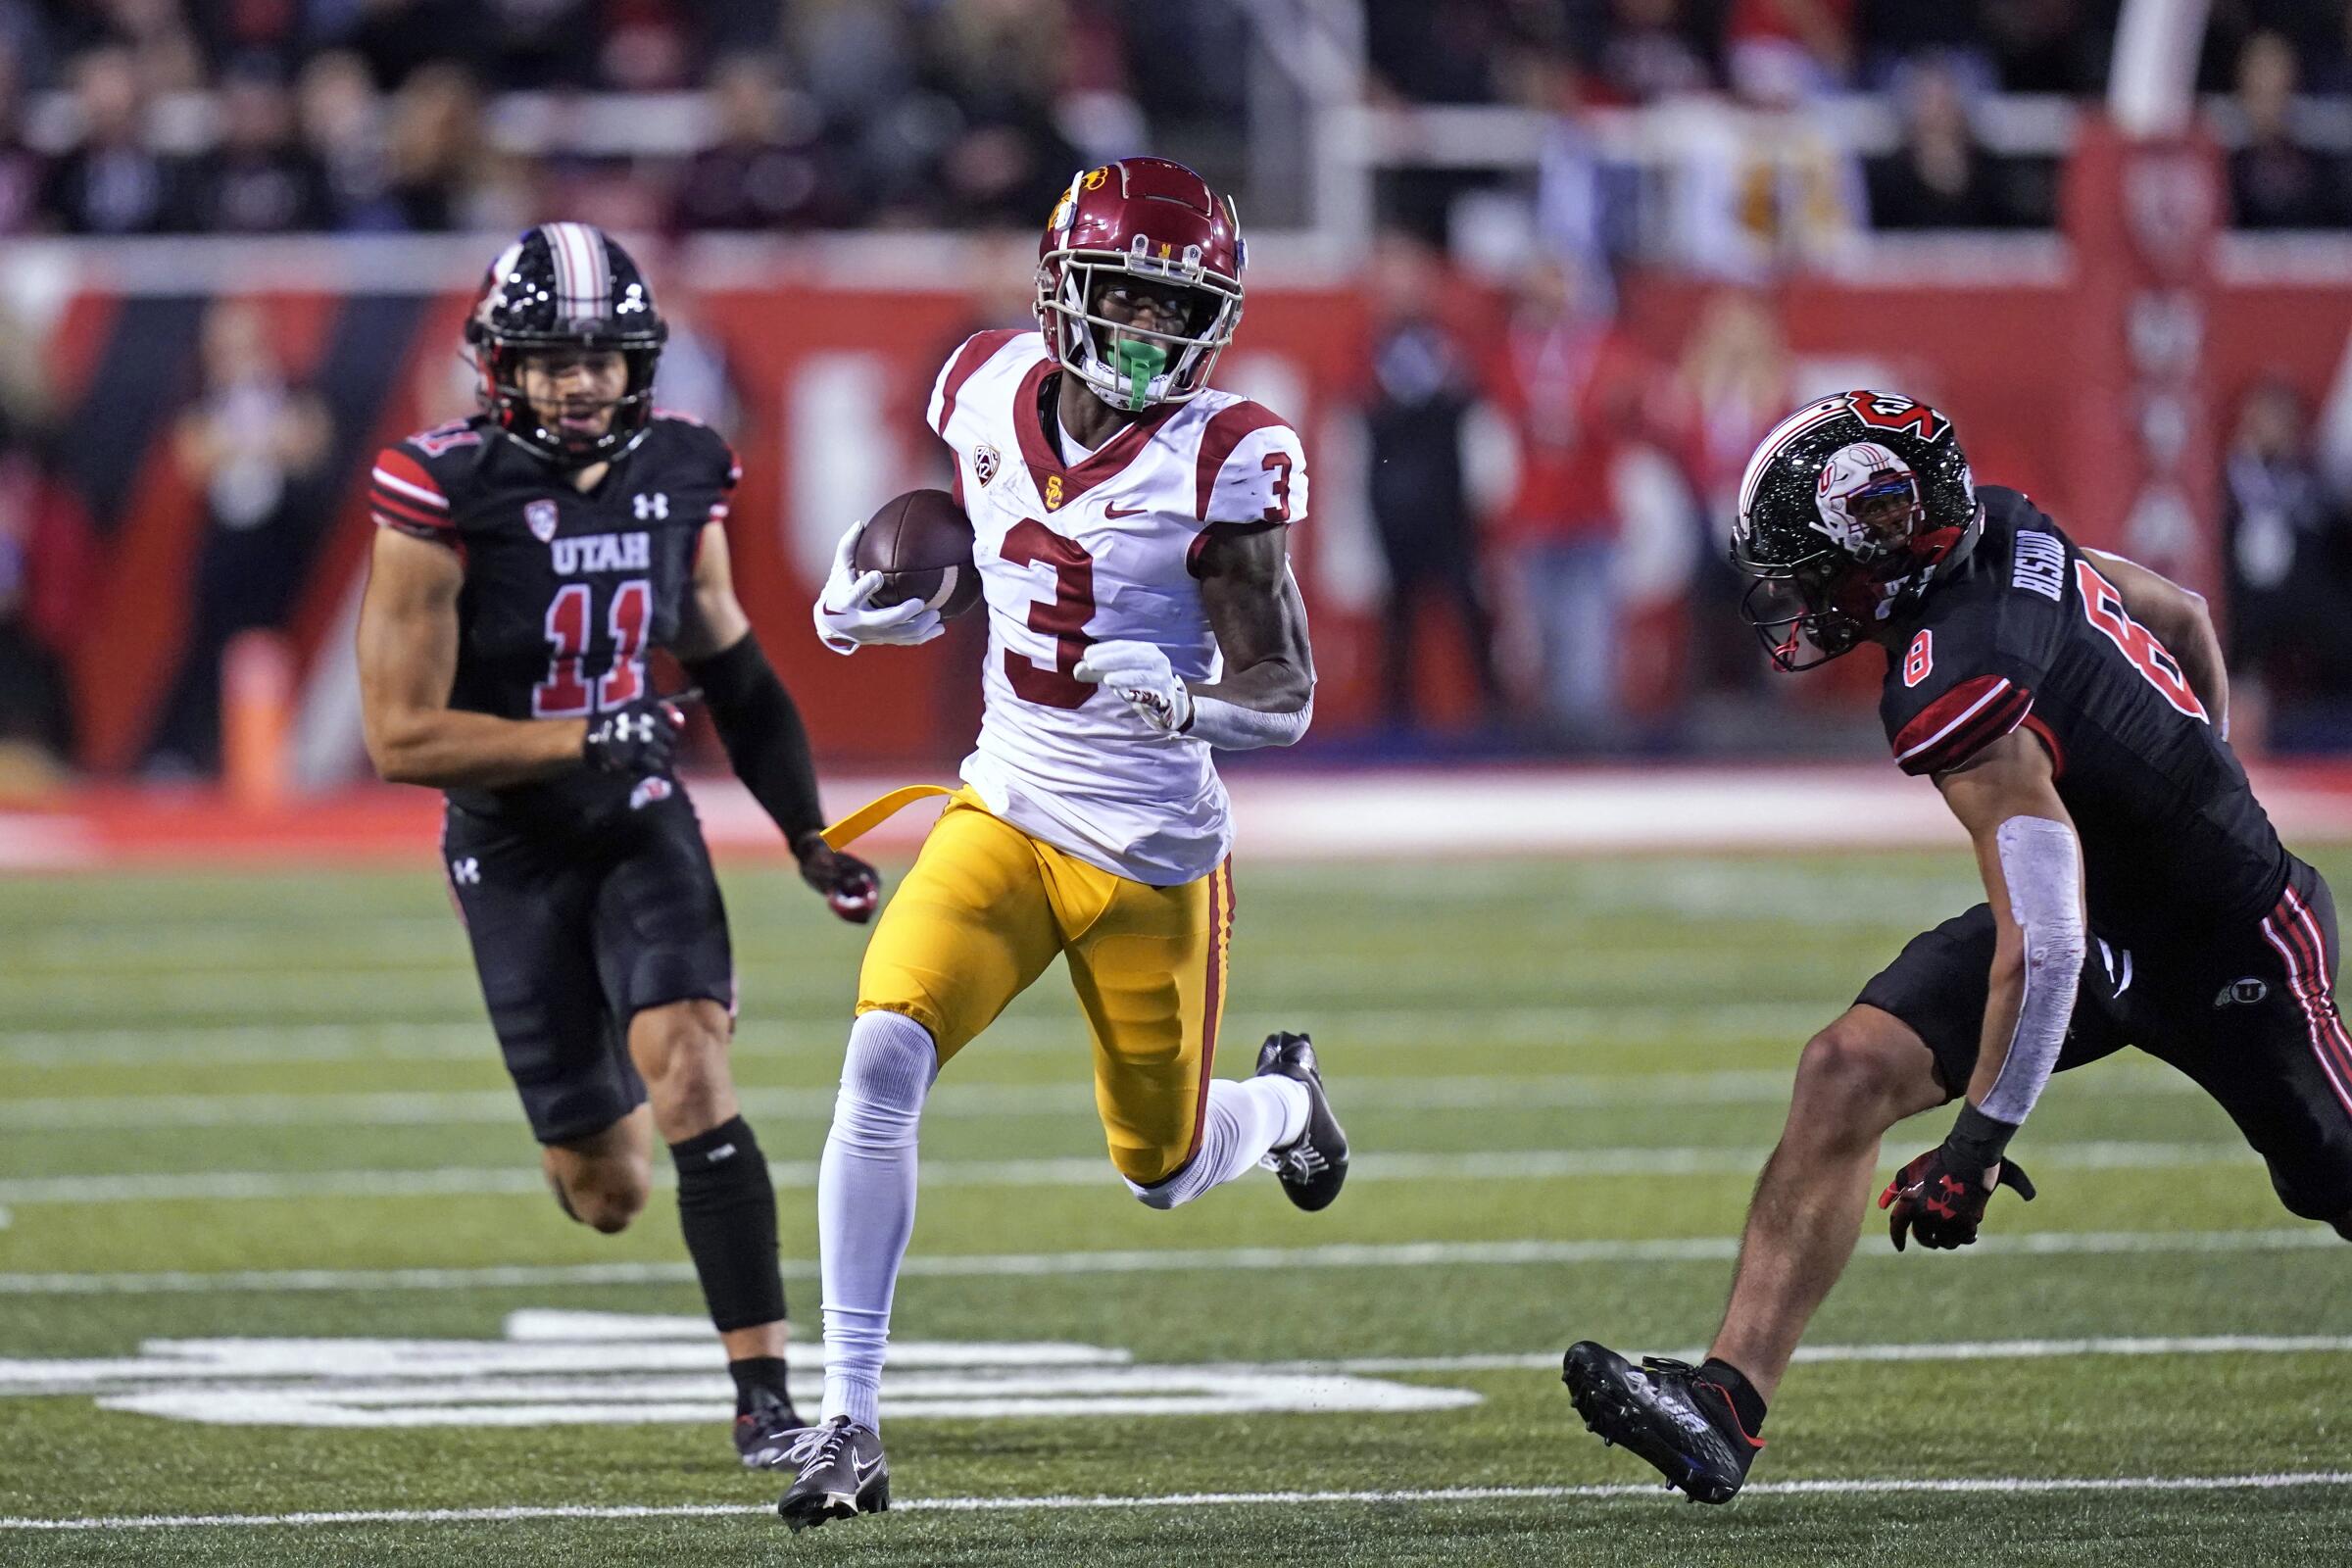 USC wide receiver Jordan Addison carries the ball after making a catch during the Trojans' loss on Oct. 15.